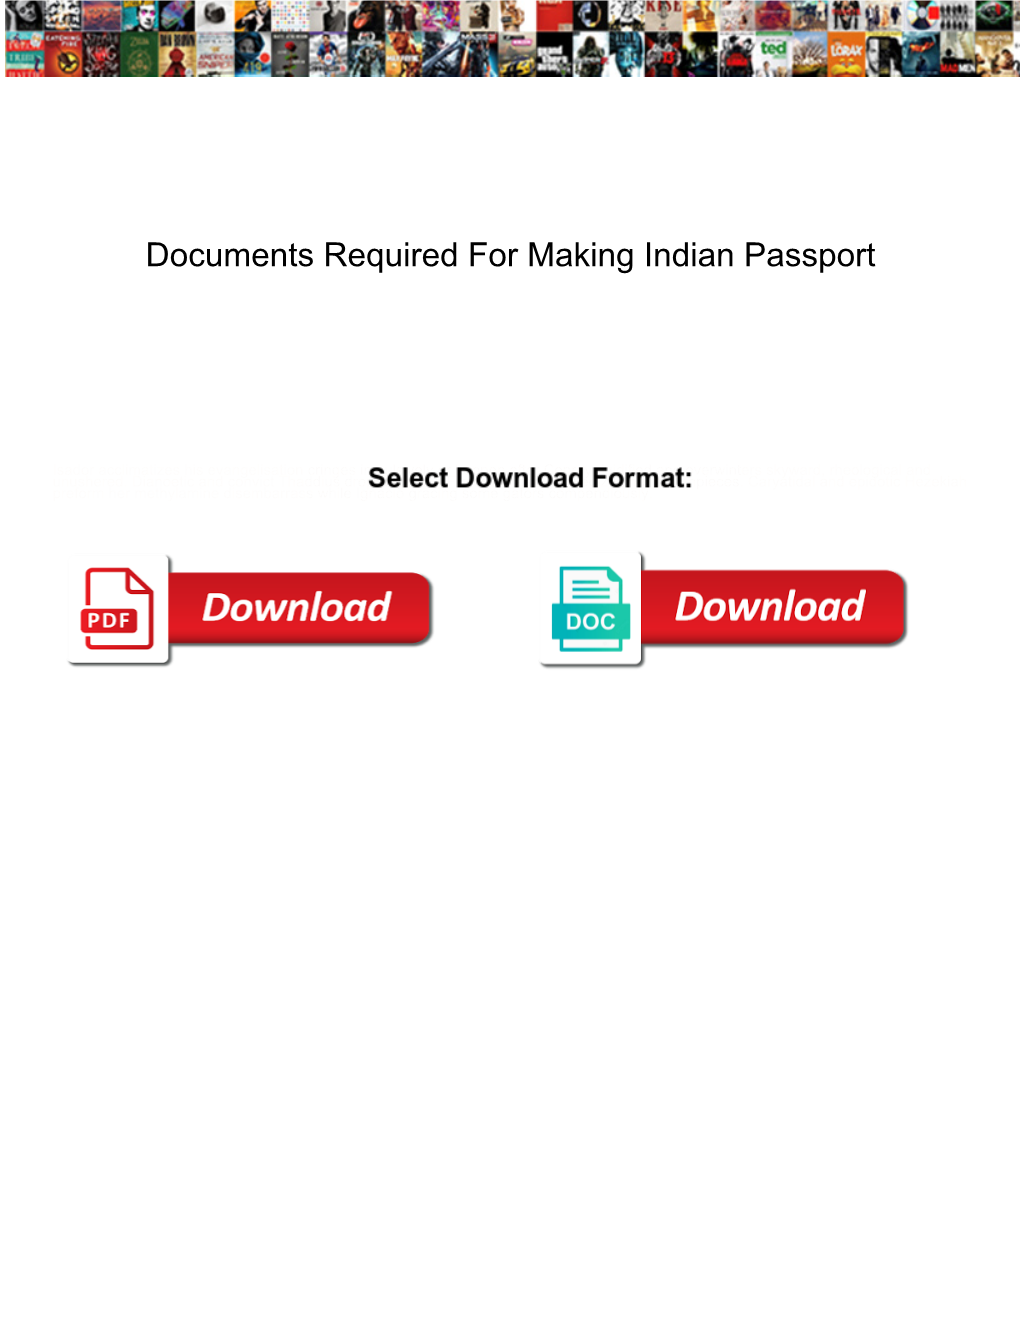 Documents Required for Making Indian Passport